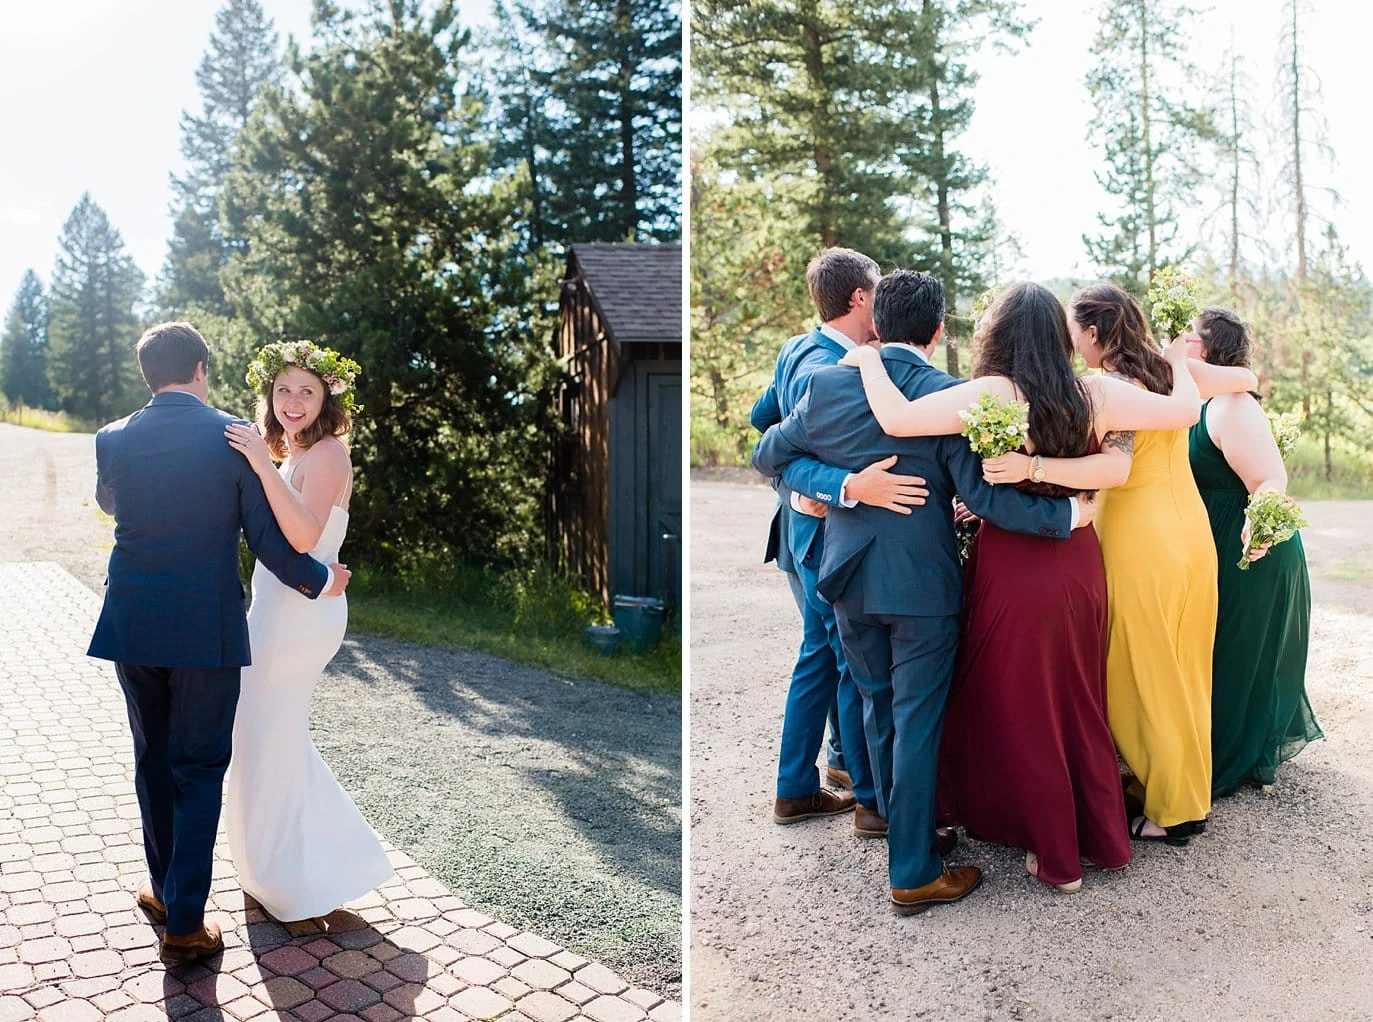 celebratory bridal party hug after outdoor ceremony photo